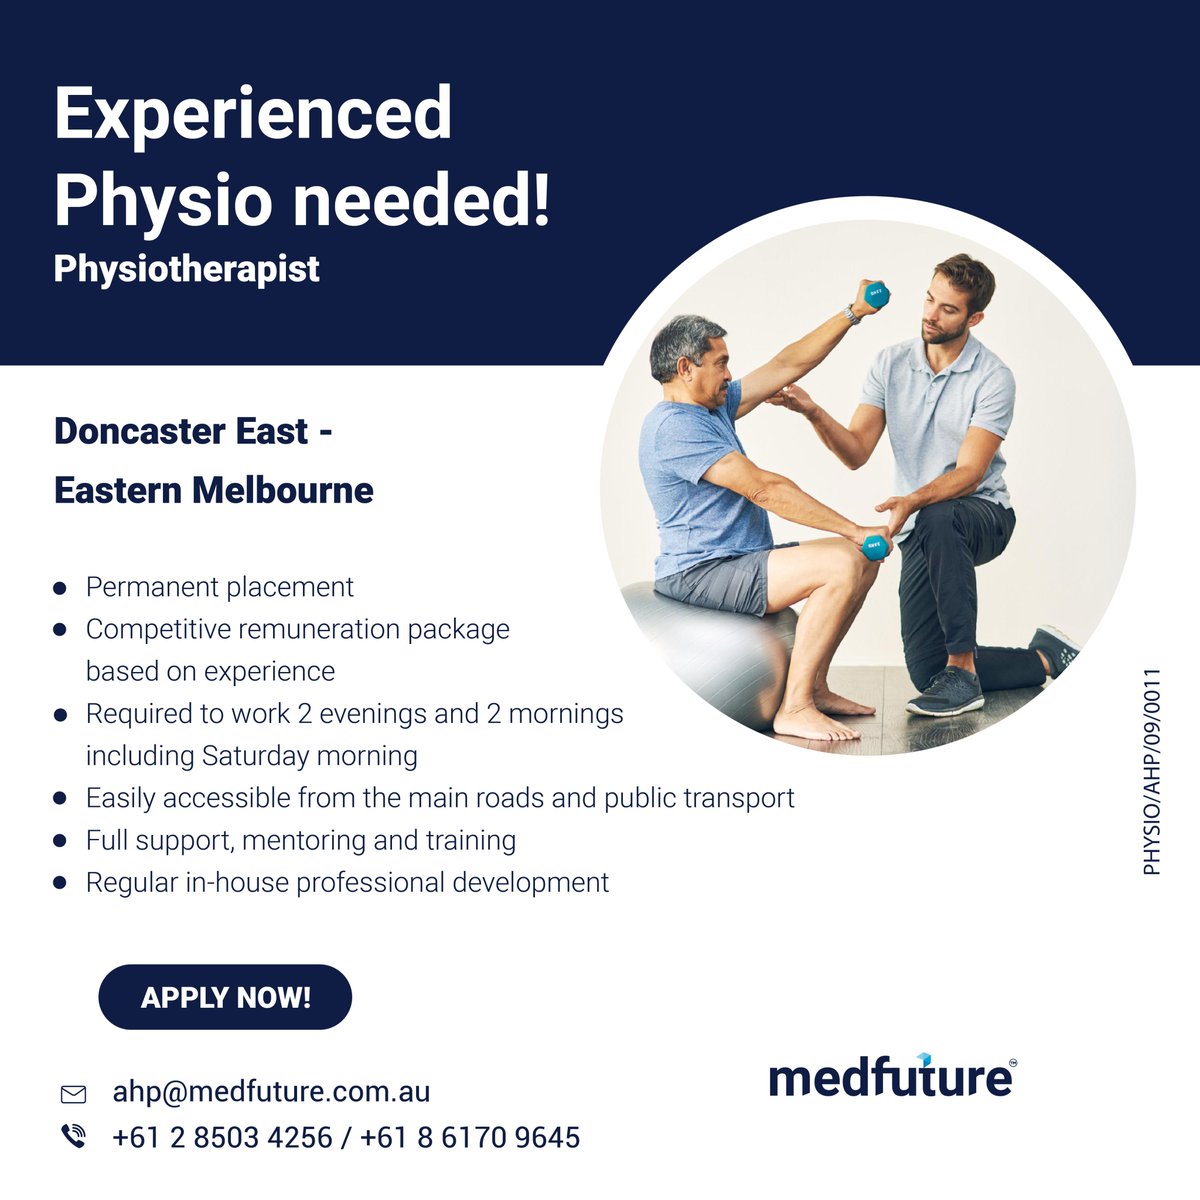 #Physiotherapist vacancies are available in #EasternMelbourne. Discover the latest medical and healthcare professional job vacancies found in Australia and New Zealand when you subscribe with Medfuture.

Search Link - medfuture.com.au/job/permanent

#PhysioJobs #EasternMelbourneJobs